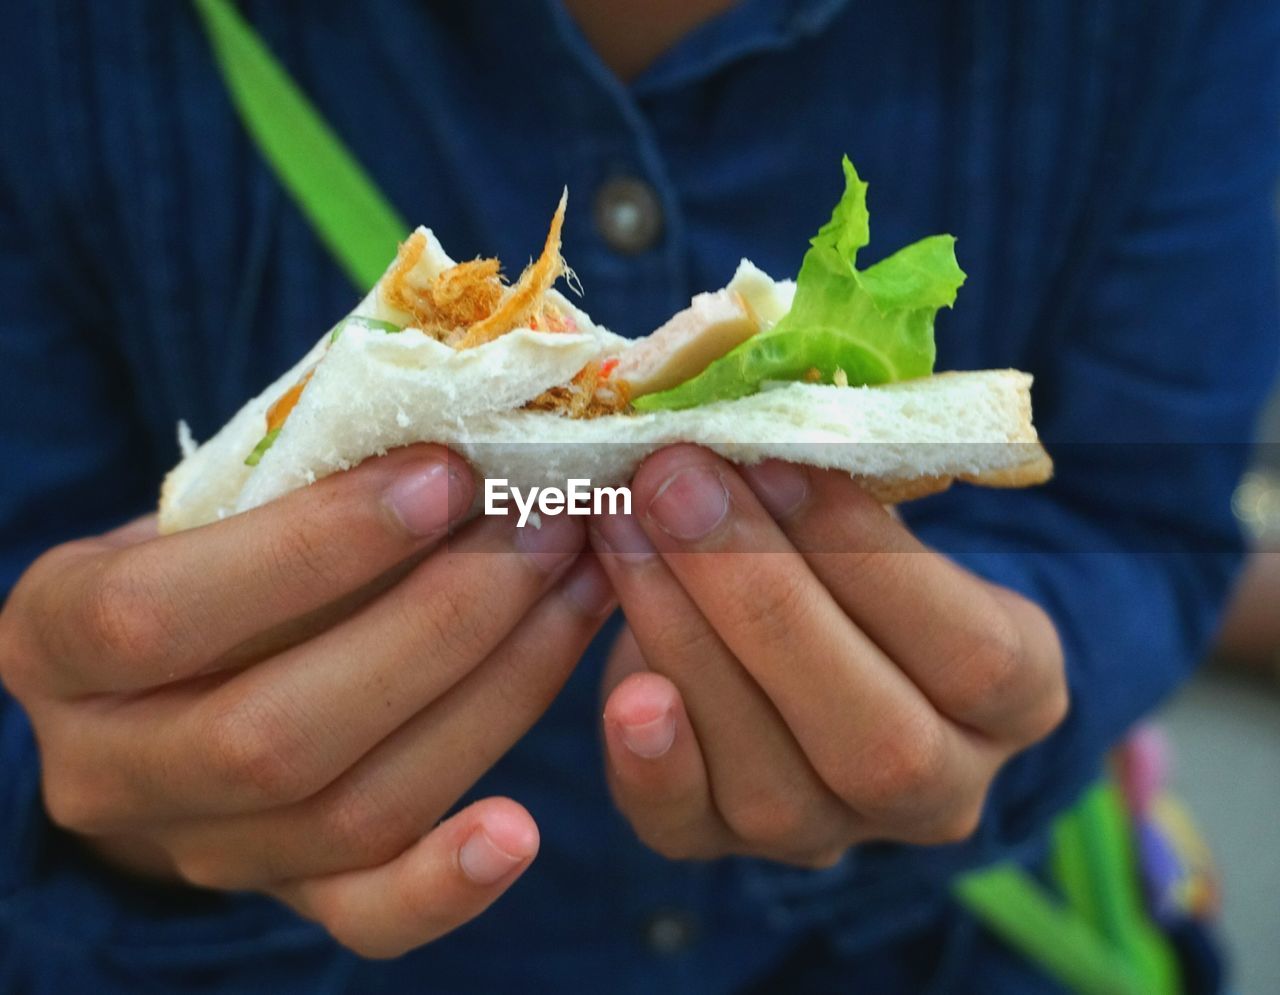 Midsection of woman holding sandwich